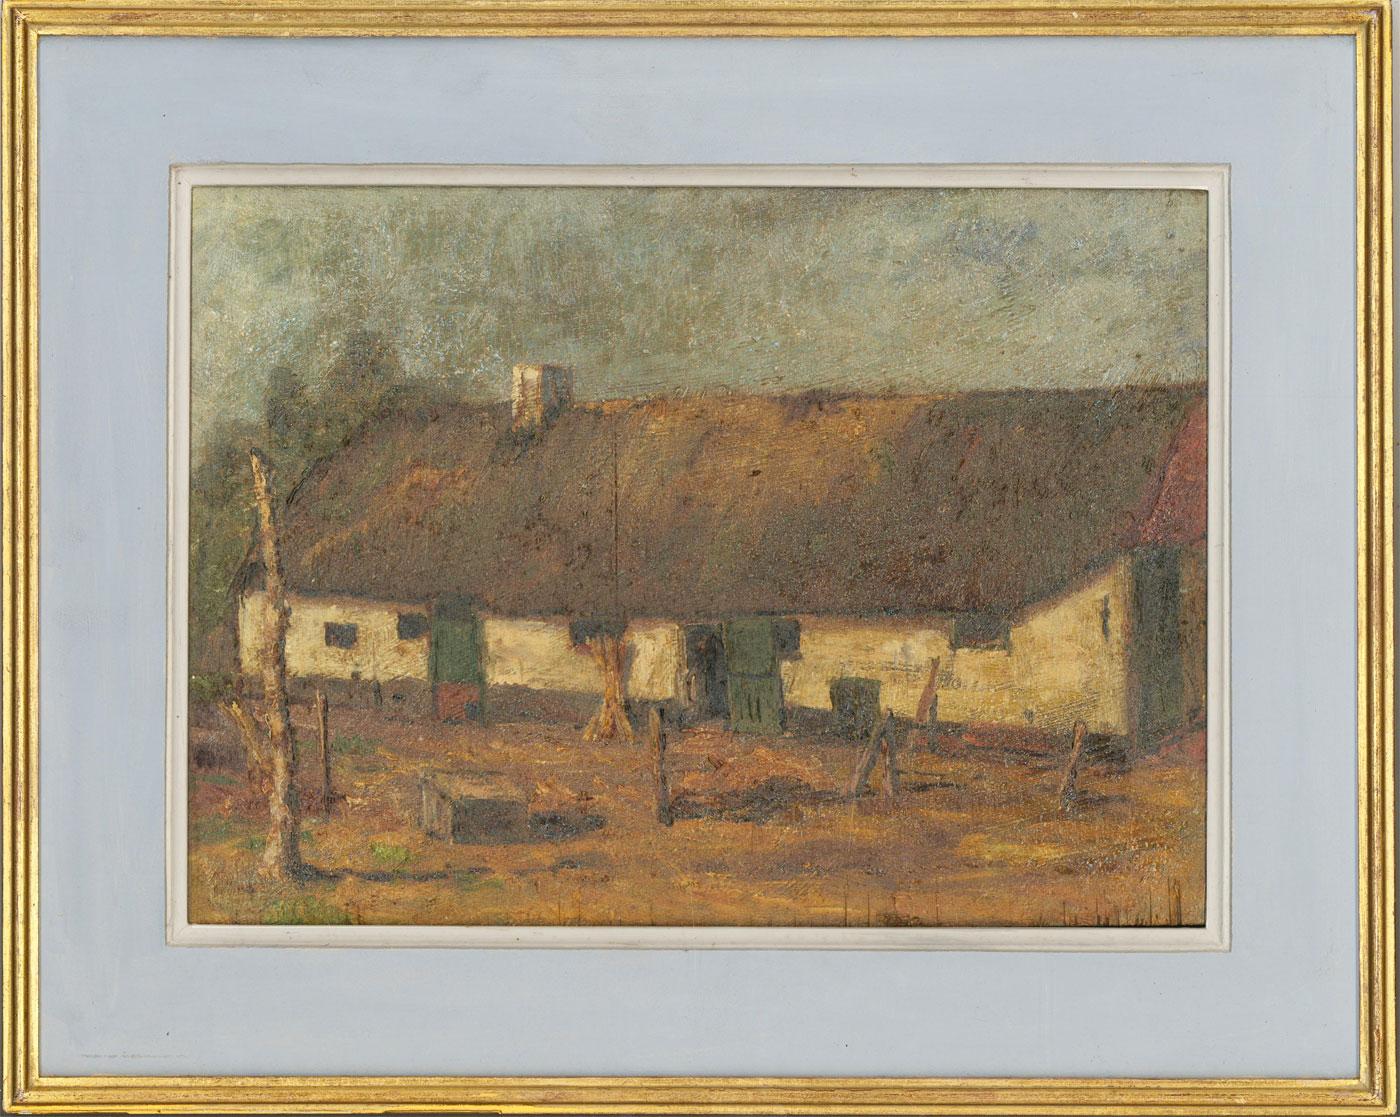 A very fine Belgian work in oil by an unknown artist, depicting a farmhouse or stable block on a countryside farm. The artist has an impressive command of the medium, depicting sunlight touching the scene in a delicate manner, evoking a late